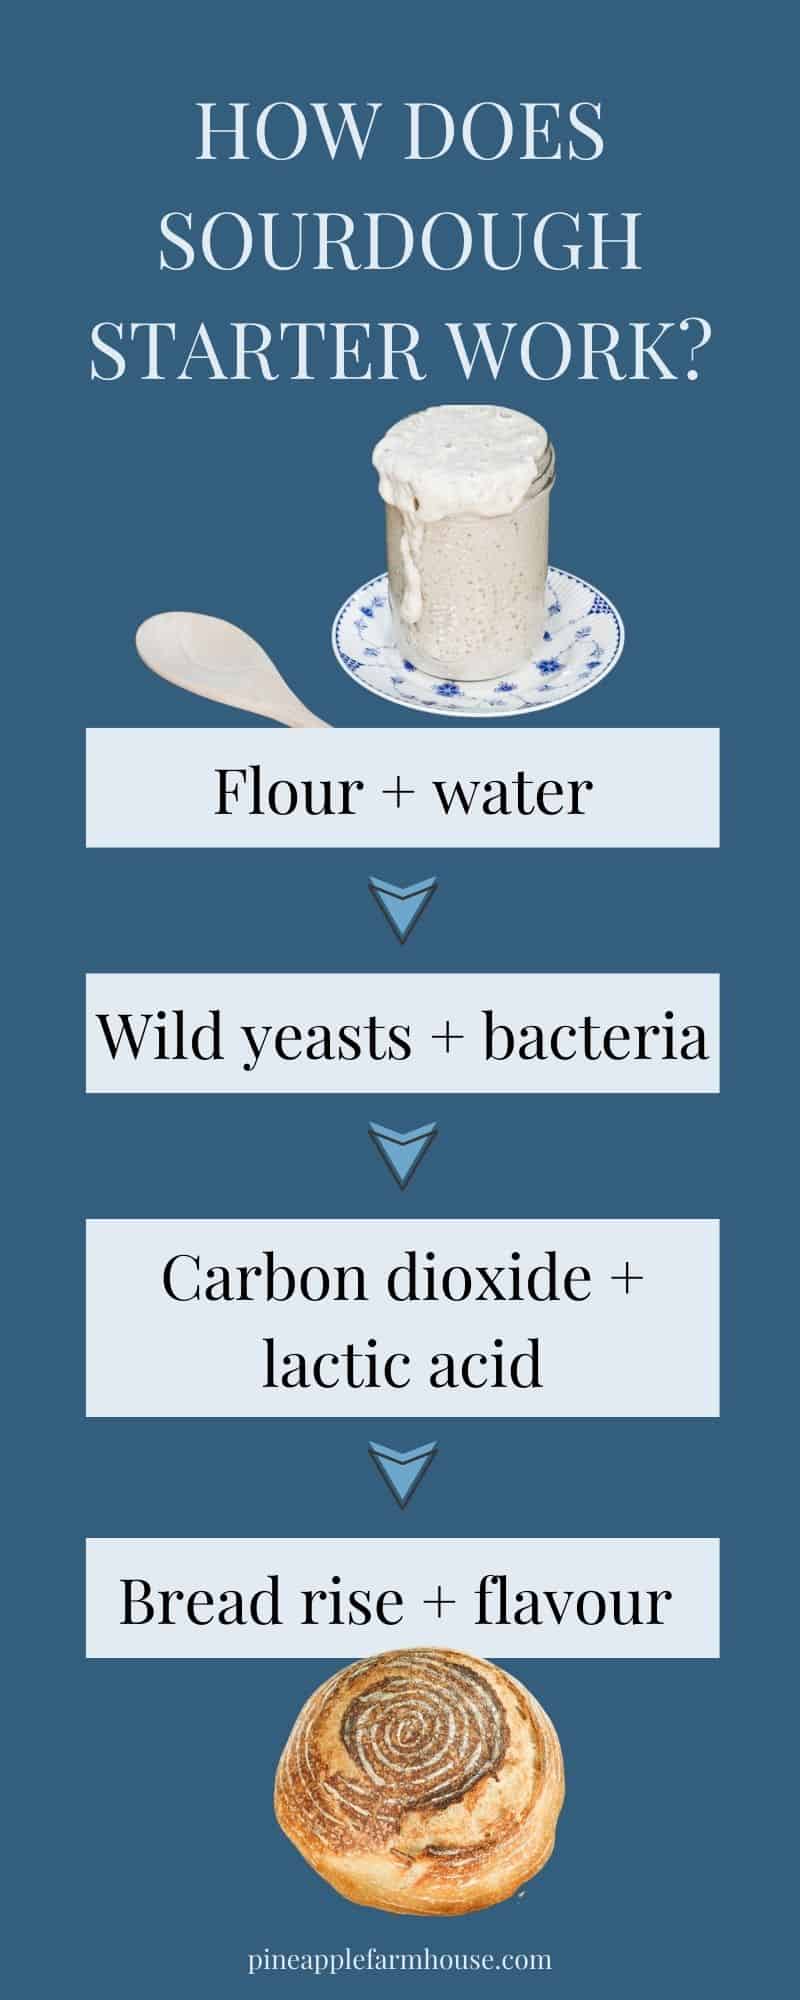 Infographic showing the process of how does sourdough starter work. There is a picture of a jr of sourdough starter at the time and a flow chart showing text 'flour + water', 'wild yeasts + bacteria', carbon dioxide + lactic acid', and 'Bread rise + flavour, and then a picture of a loaf of sourdough bread